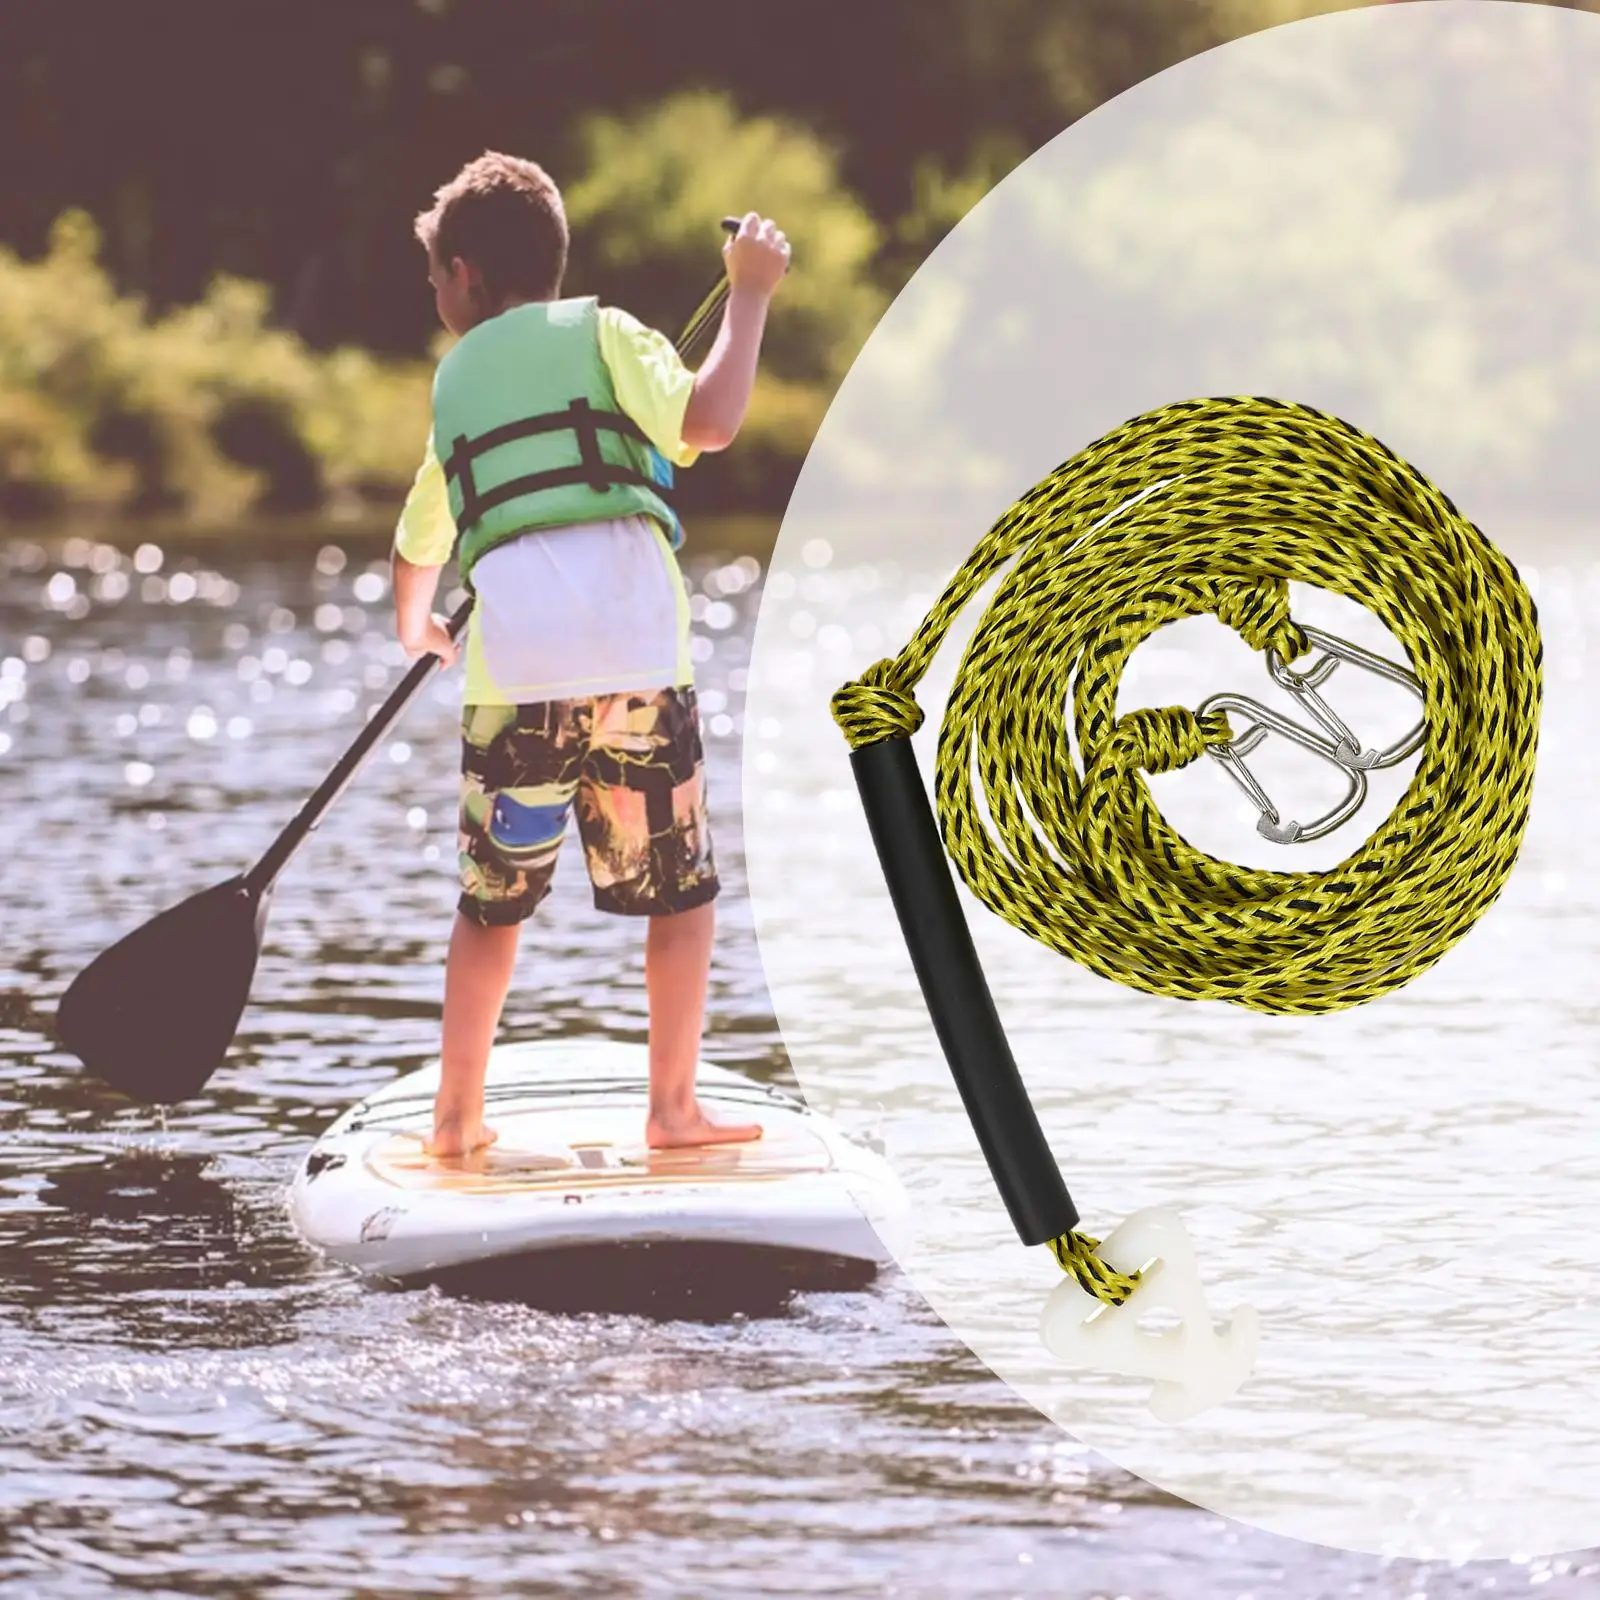 17ft Boat Tow Harness Watersports Rope with Hook Quick Connector for Waakeboarding Wake Boarding Water Ski Boating Tubing